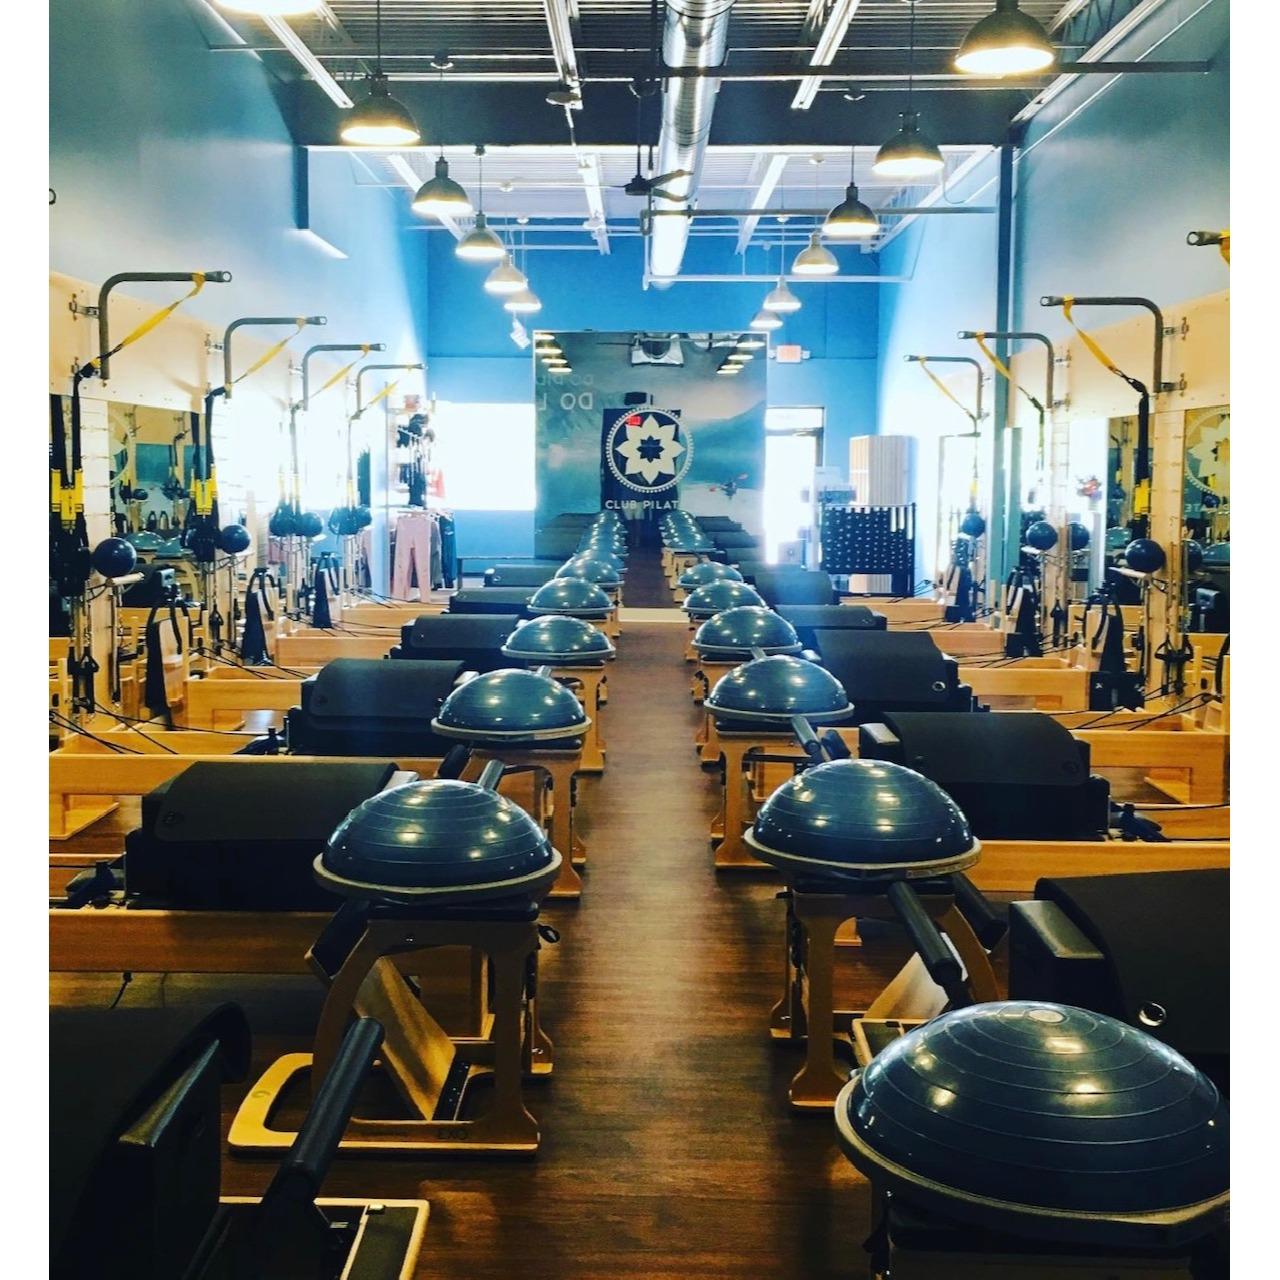 Personal Pilates and Fitness - Canton MI Personal Pilates by Liz